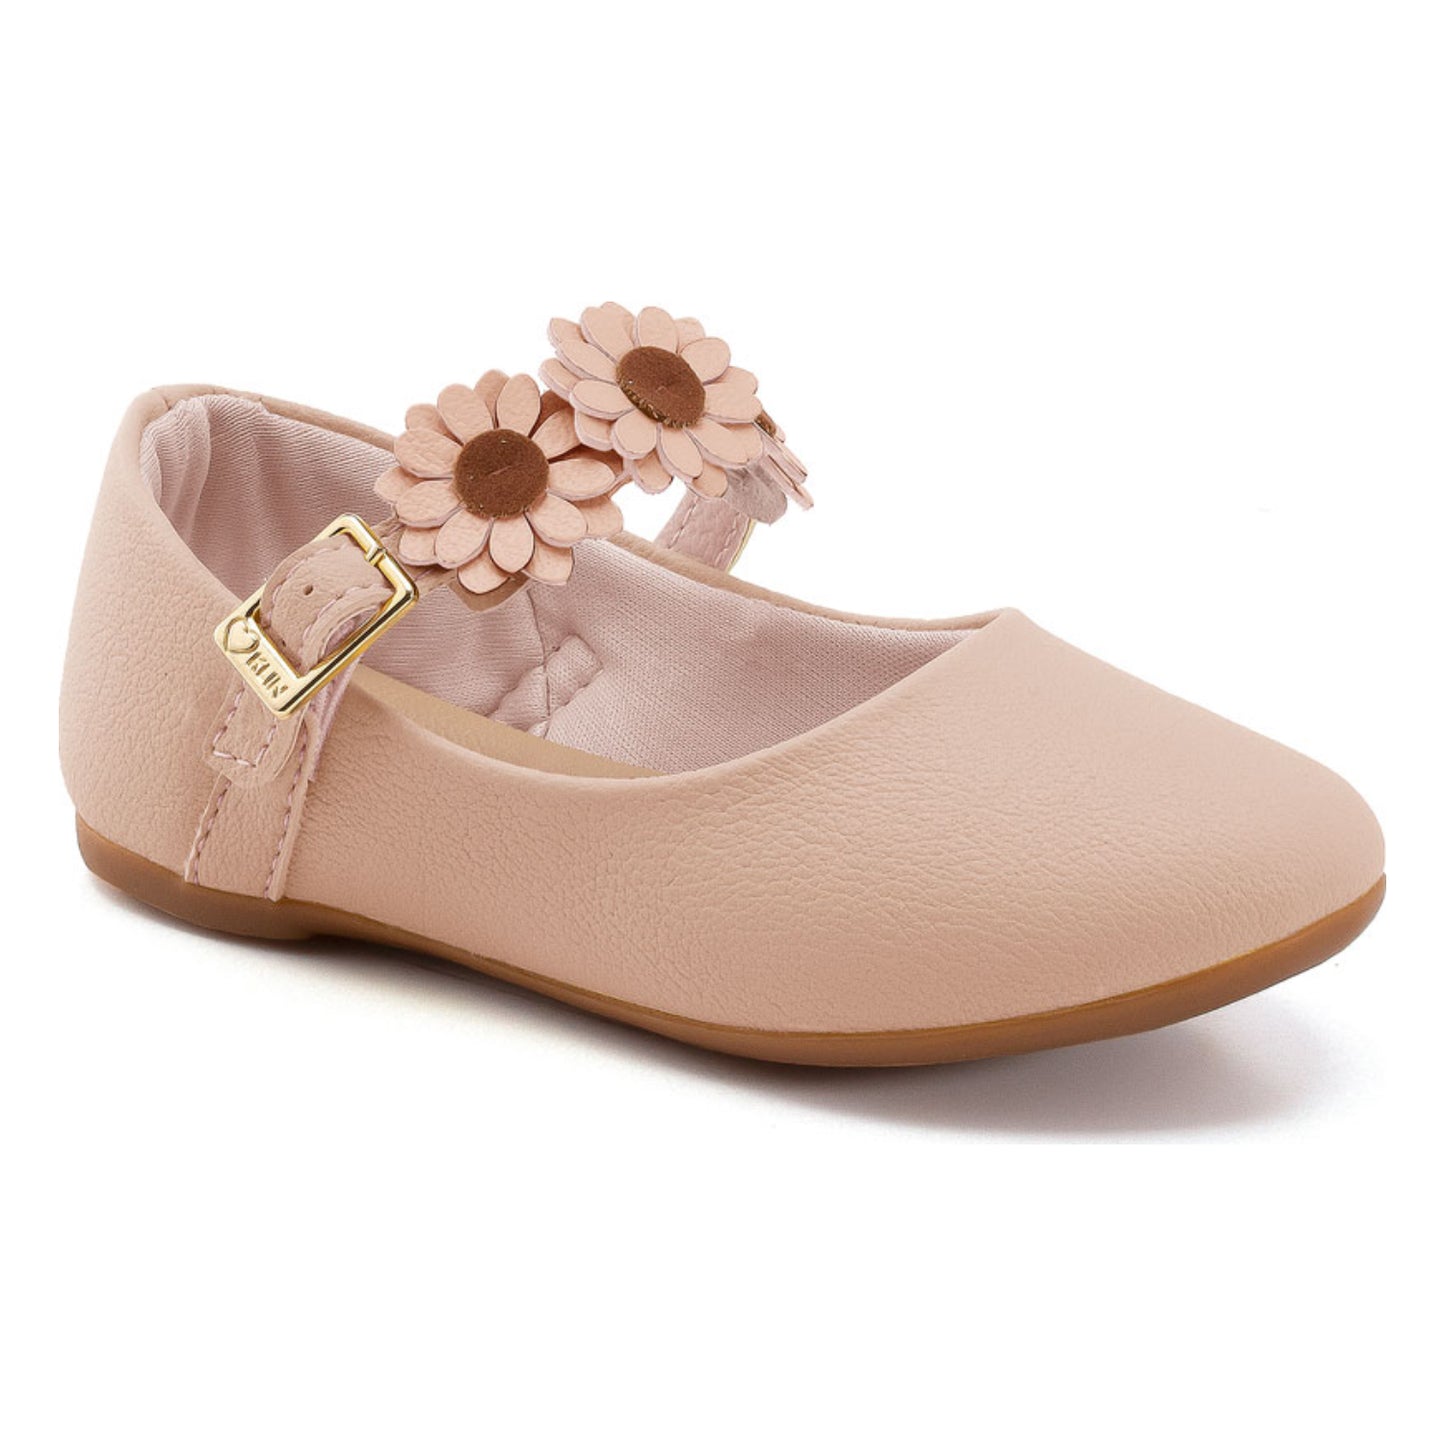 Girls Mary Jane Kids Shoes Pink Flowers